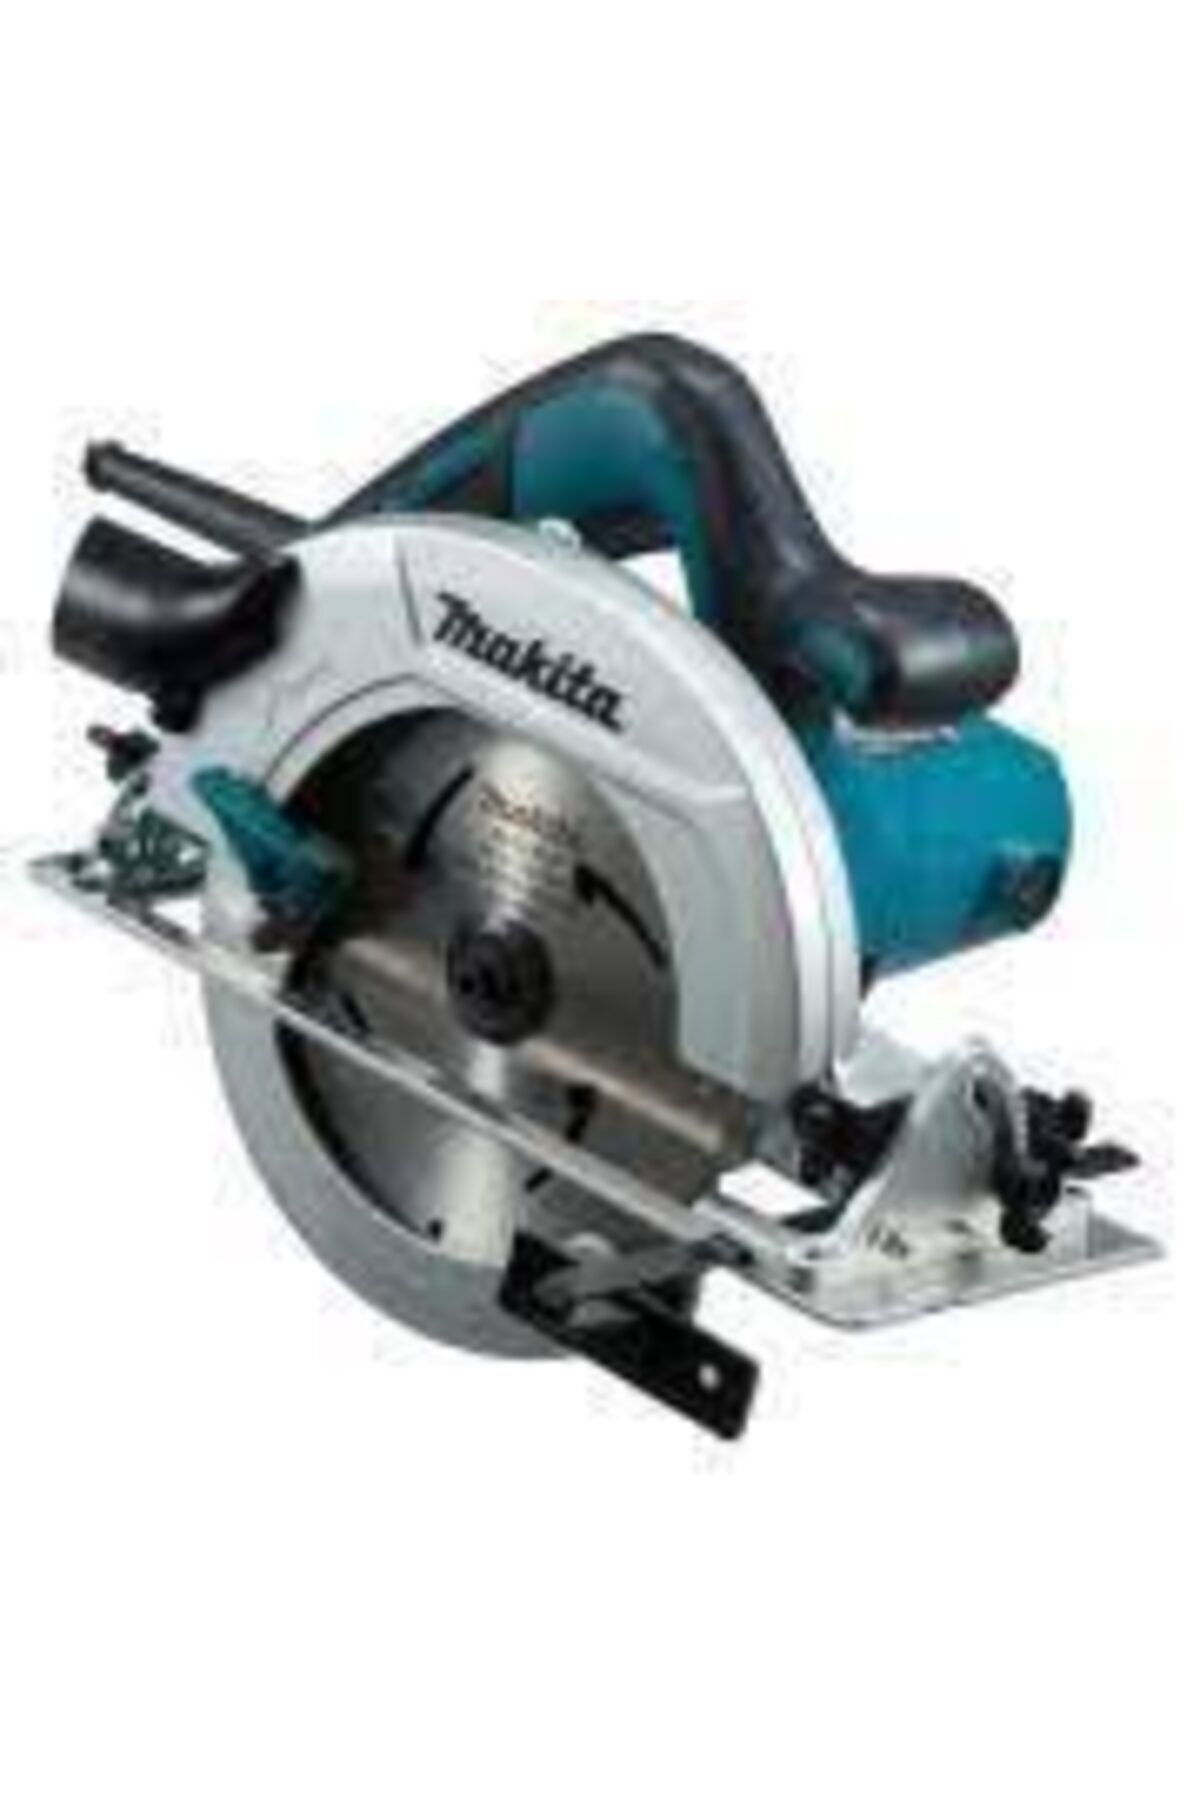 Makita Hs7601 (190mm) Daire Testere